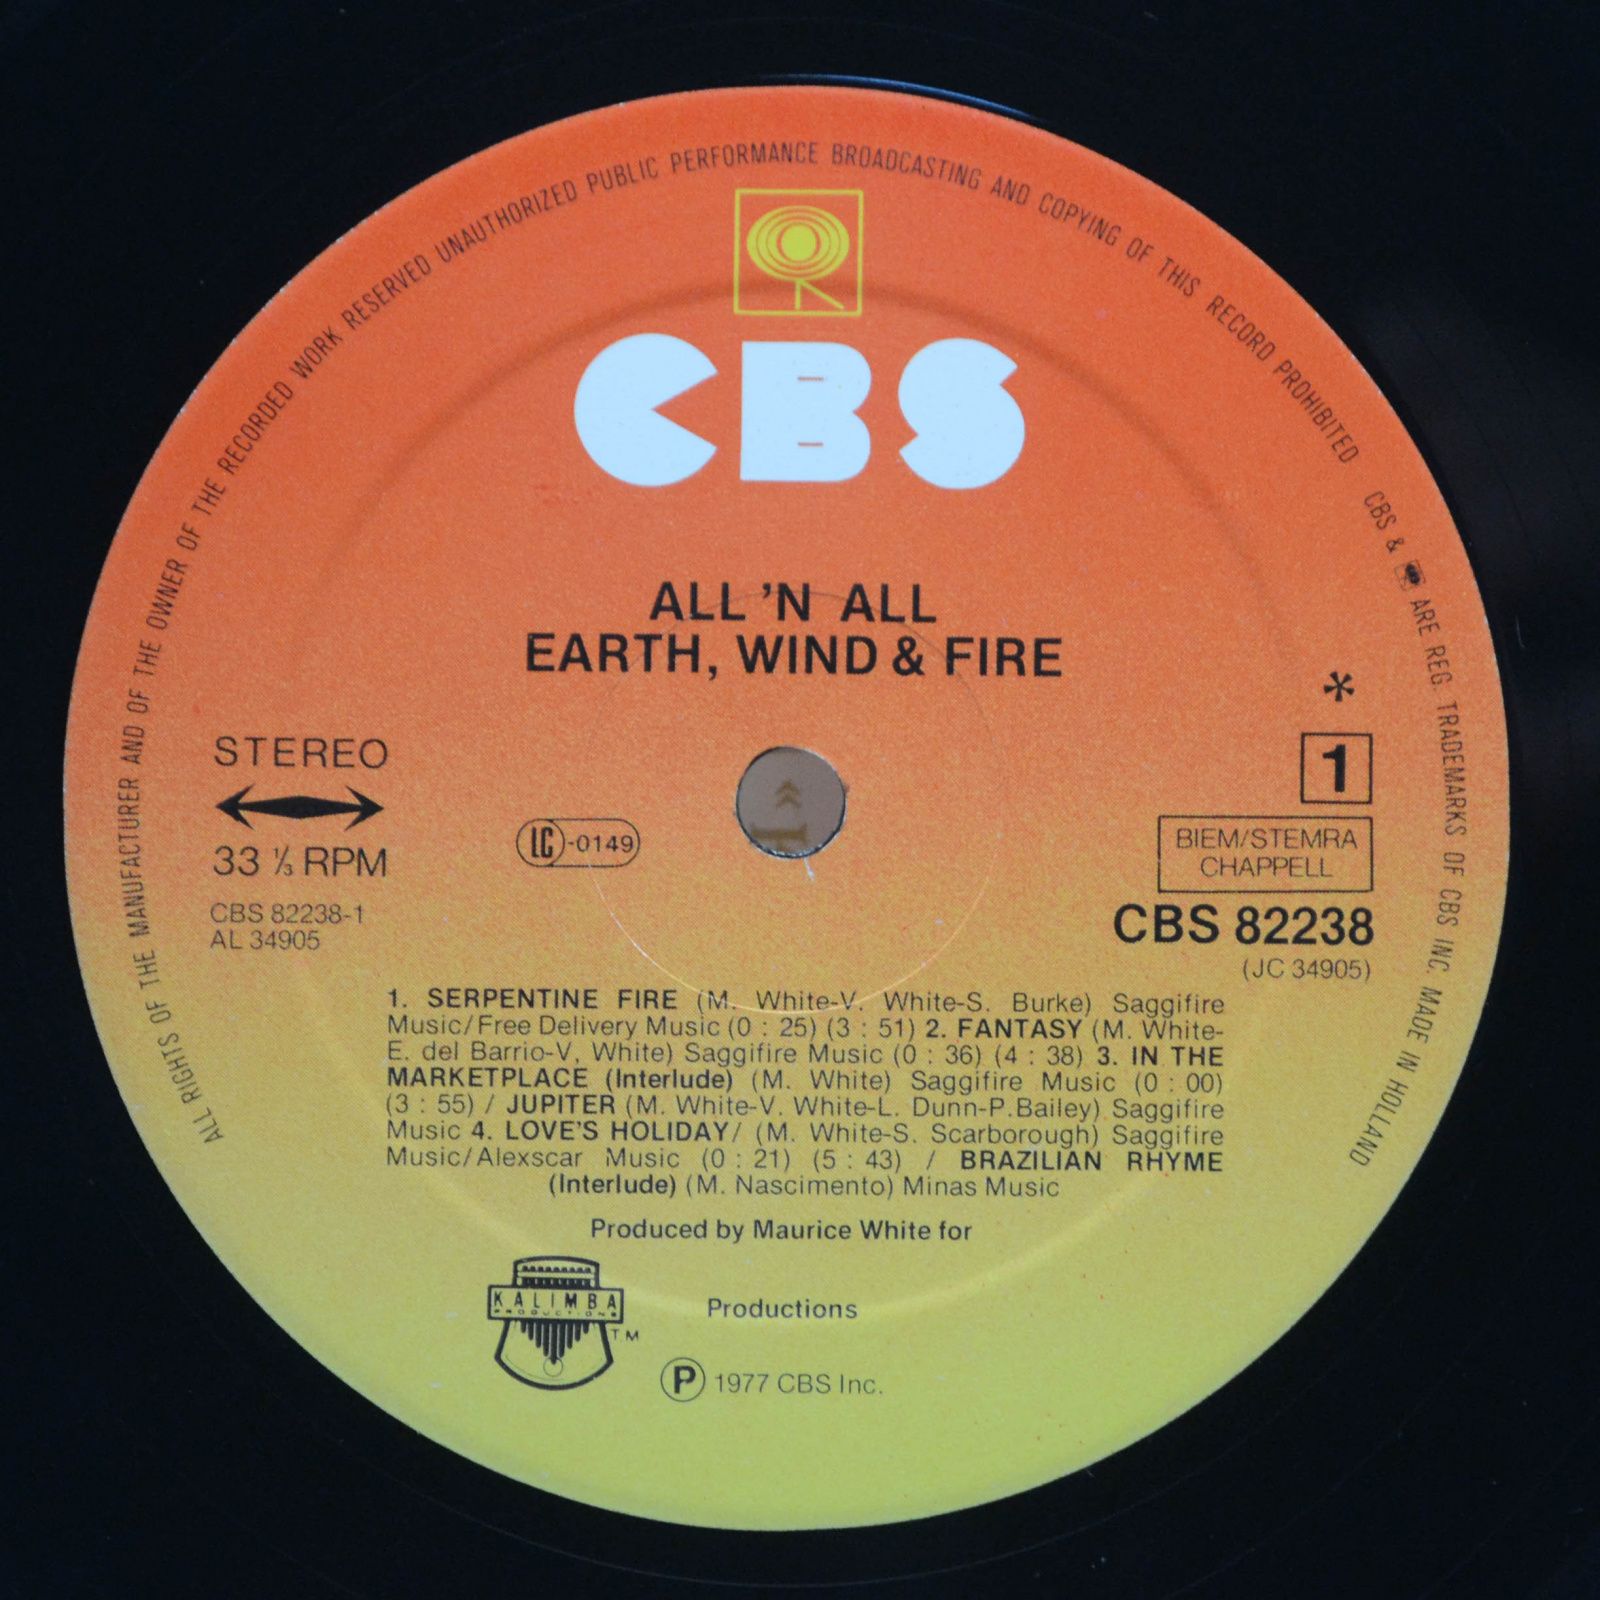 Earth, Wind & Fire — All 'N All (poster), 1977